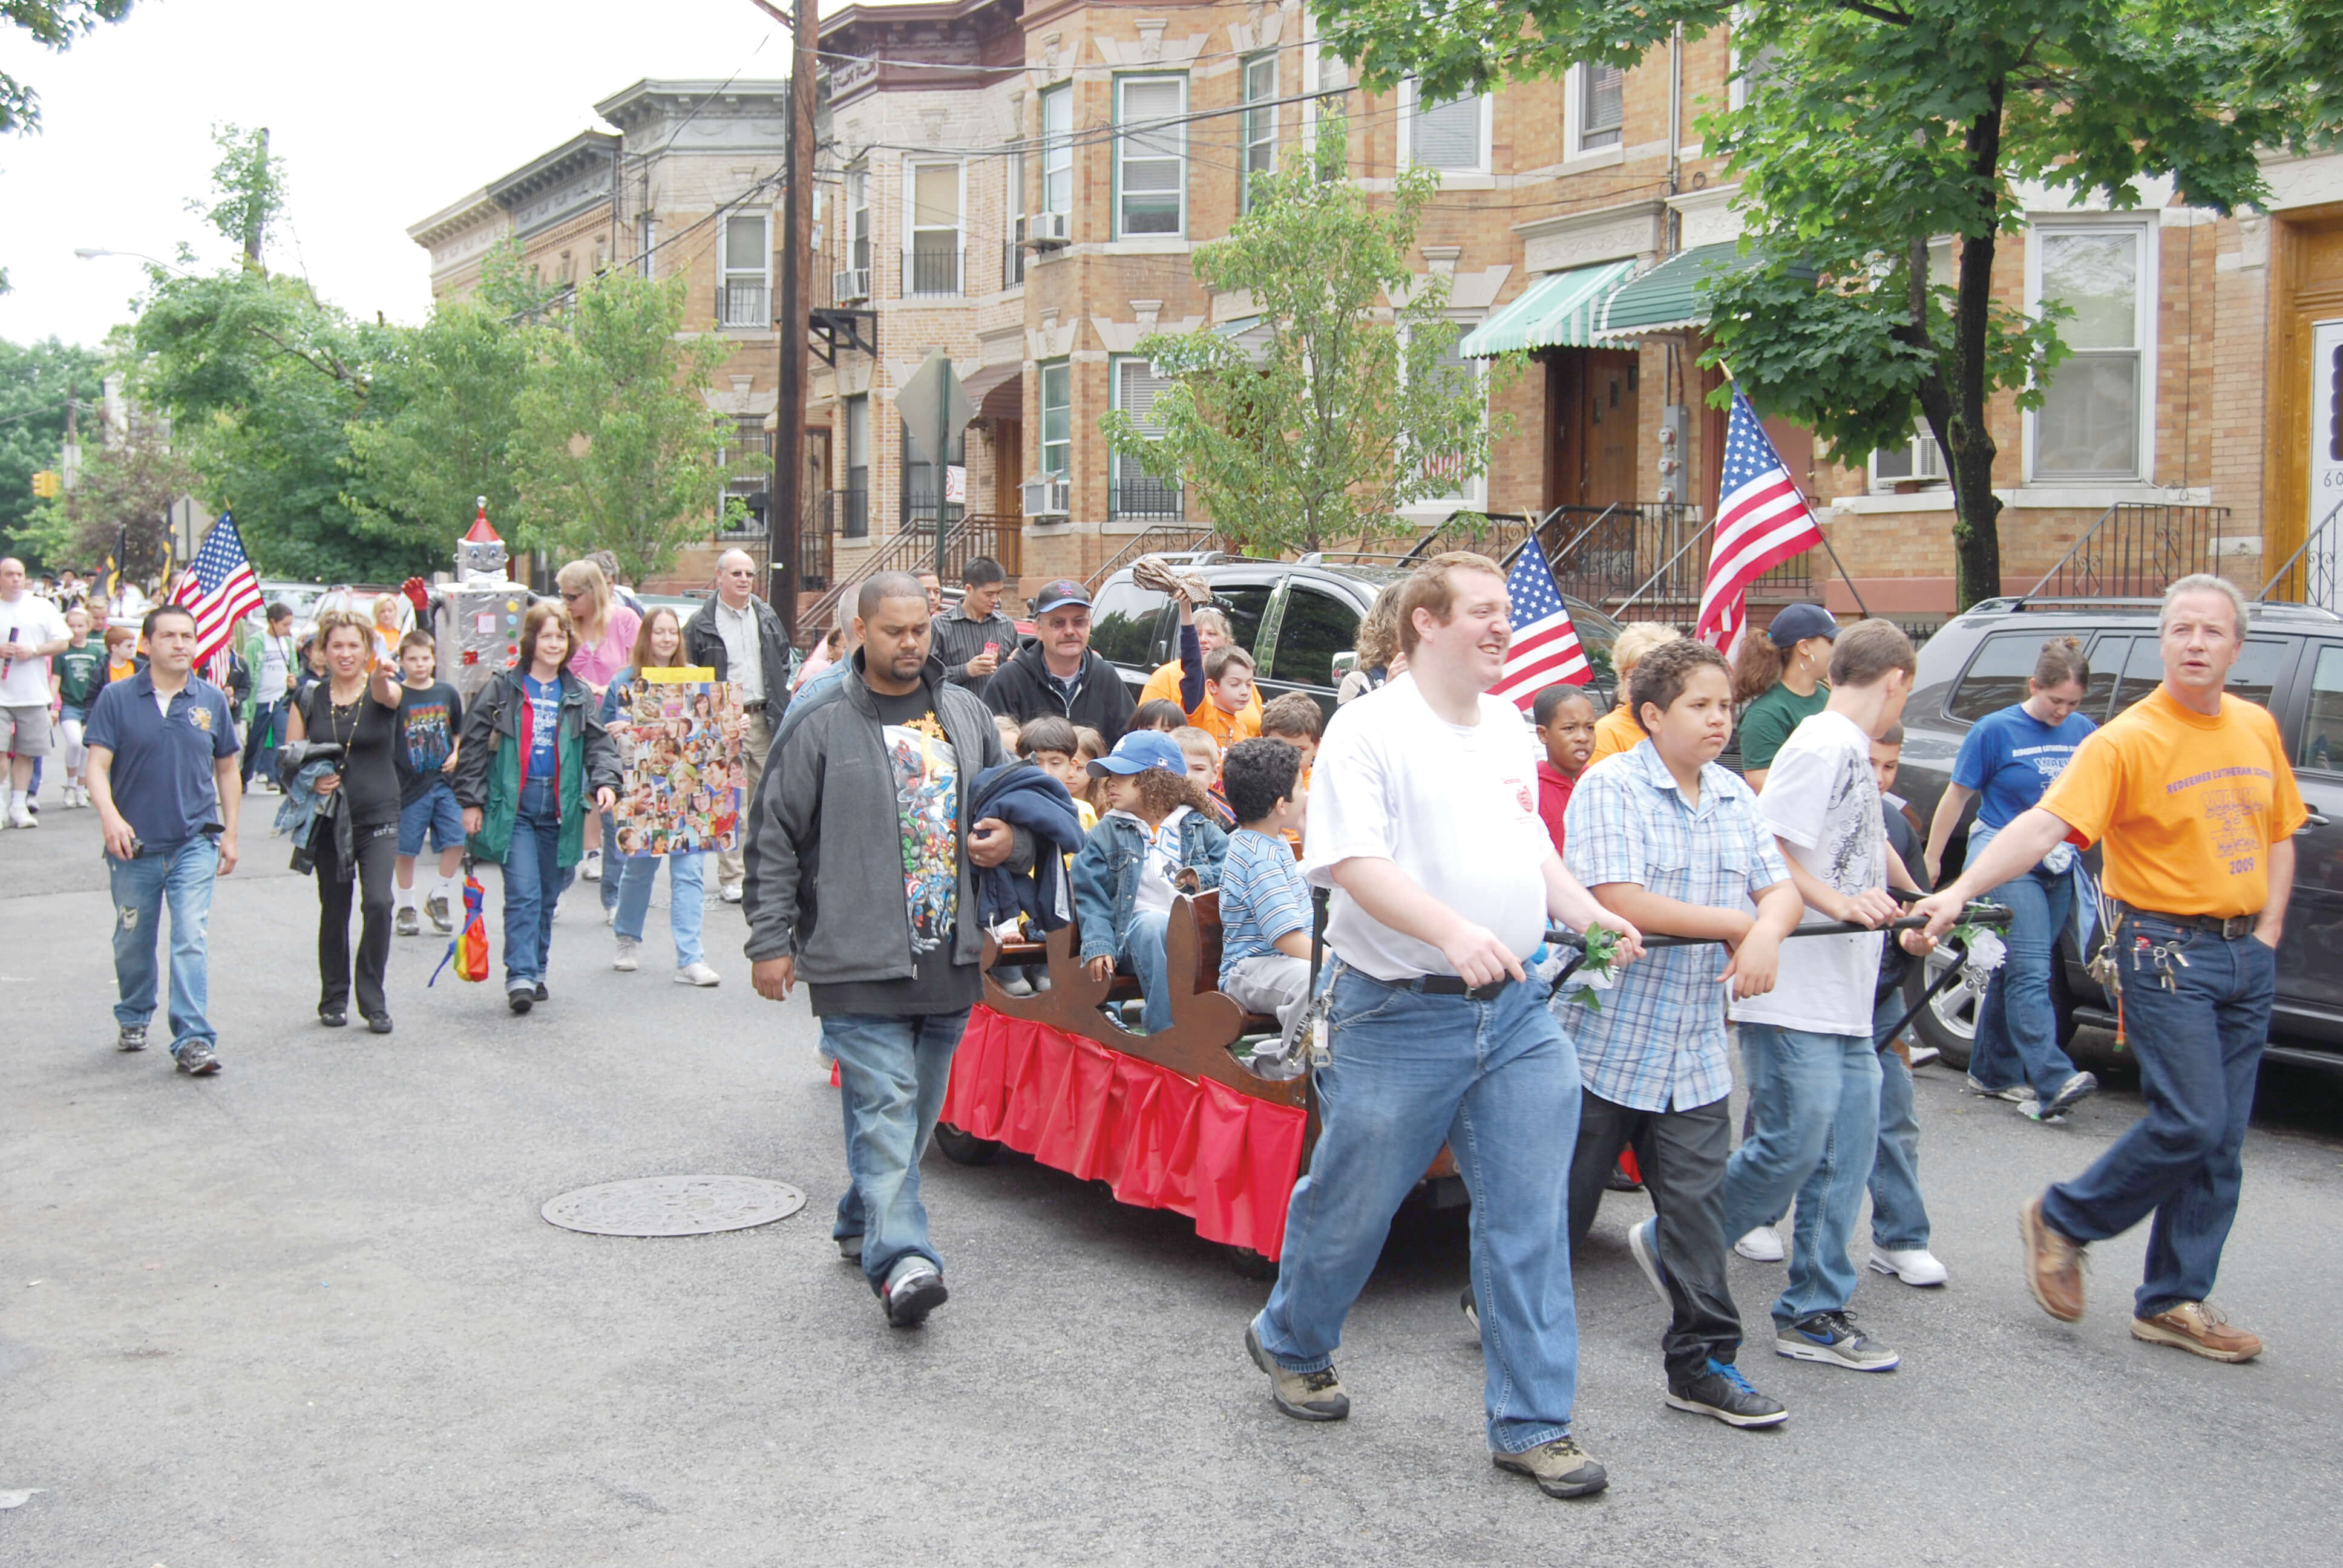 Members of Redeemer Lutheran School in Glendale marching in the 2009 Anniversary Day Parade along Catalpa Avenue in Ridgewood.